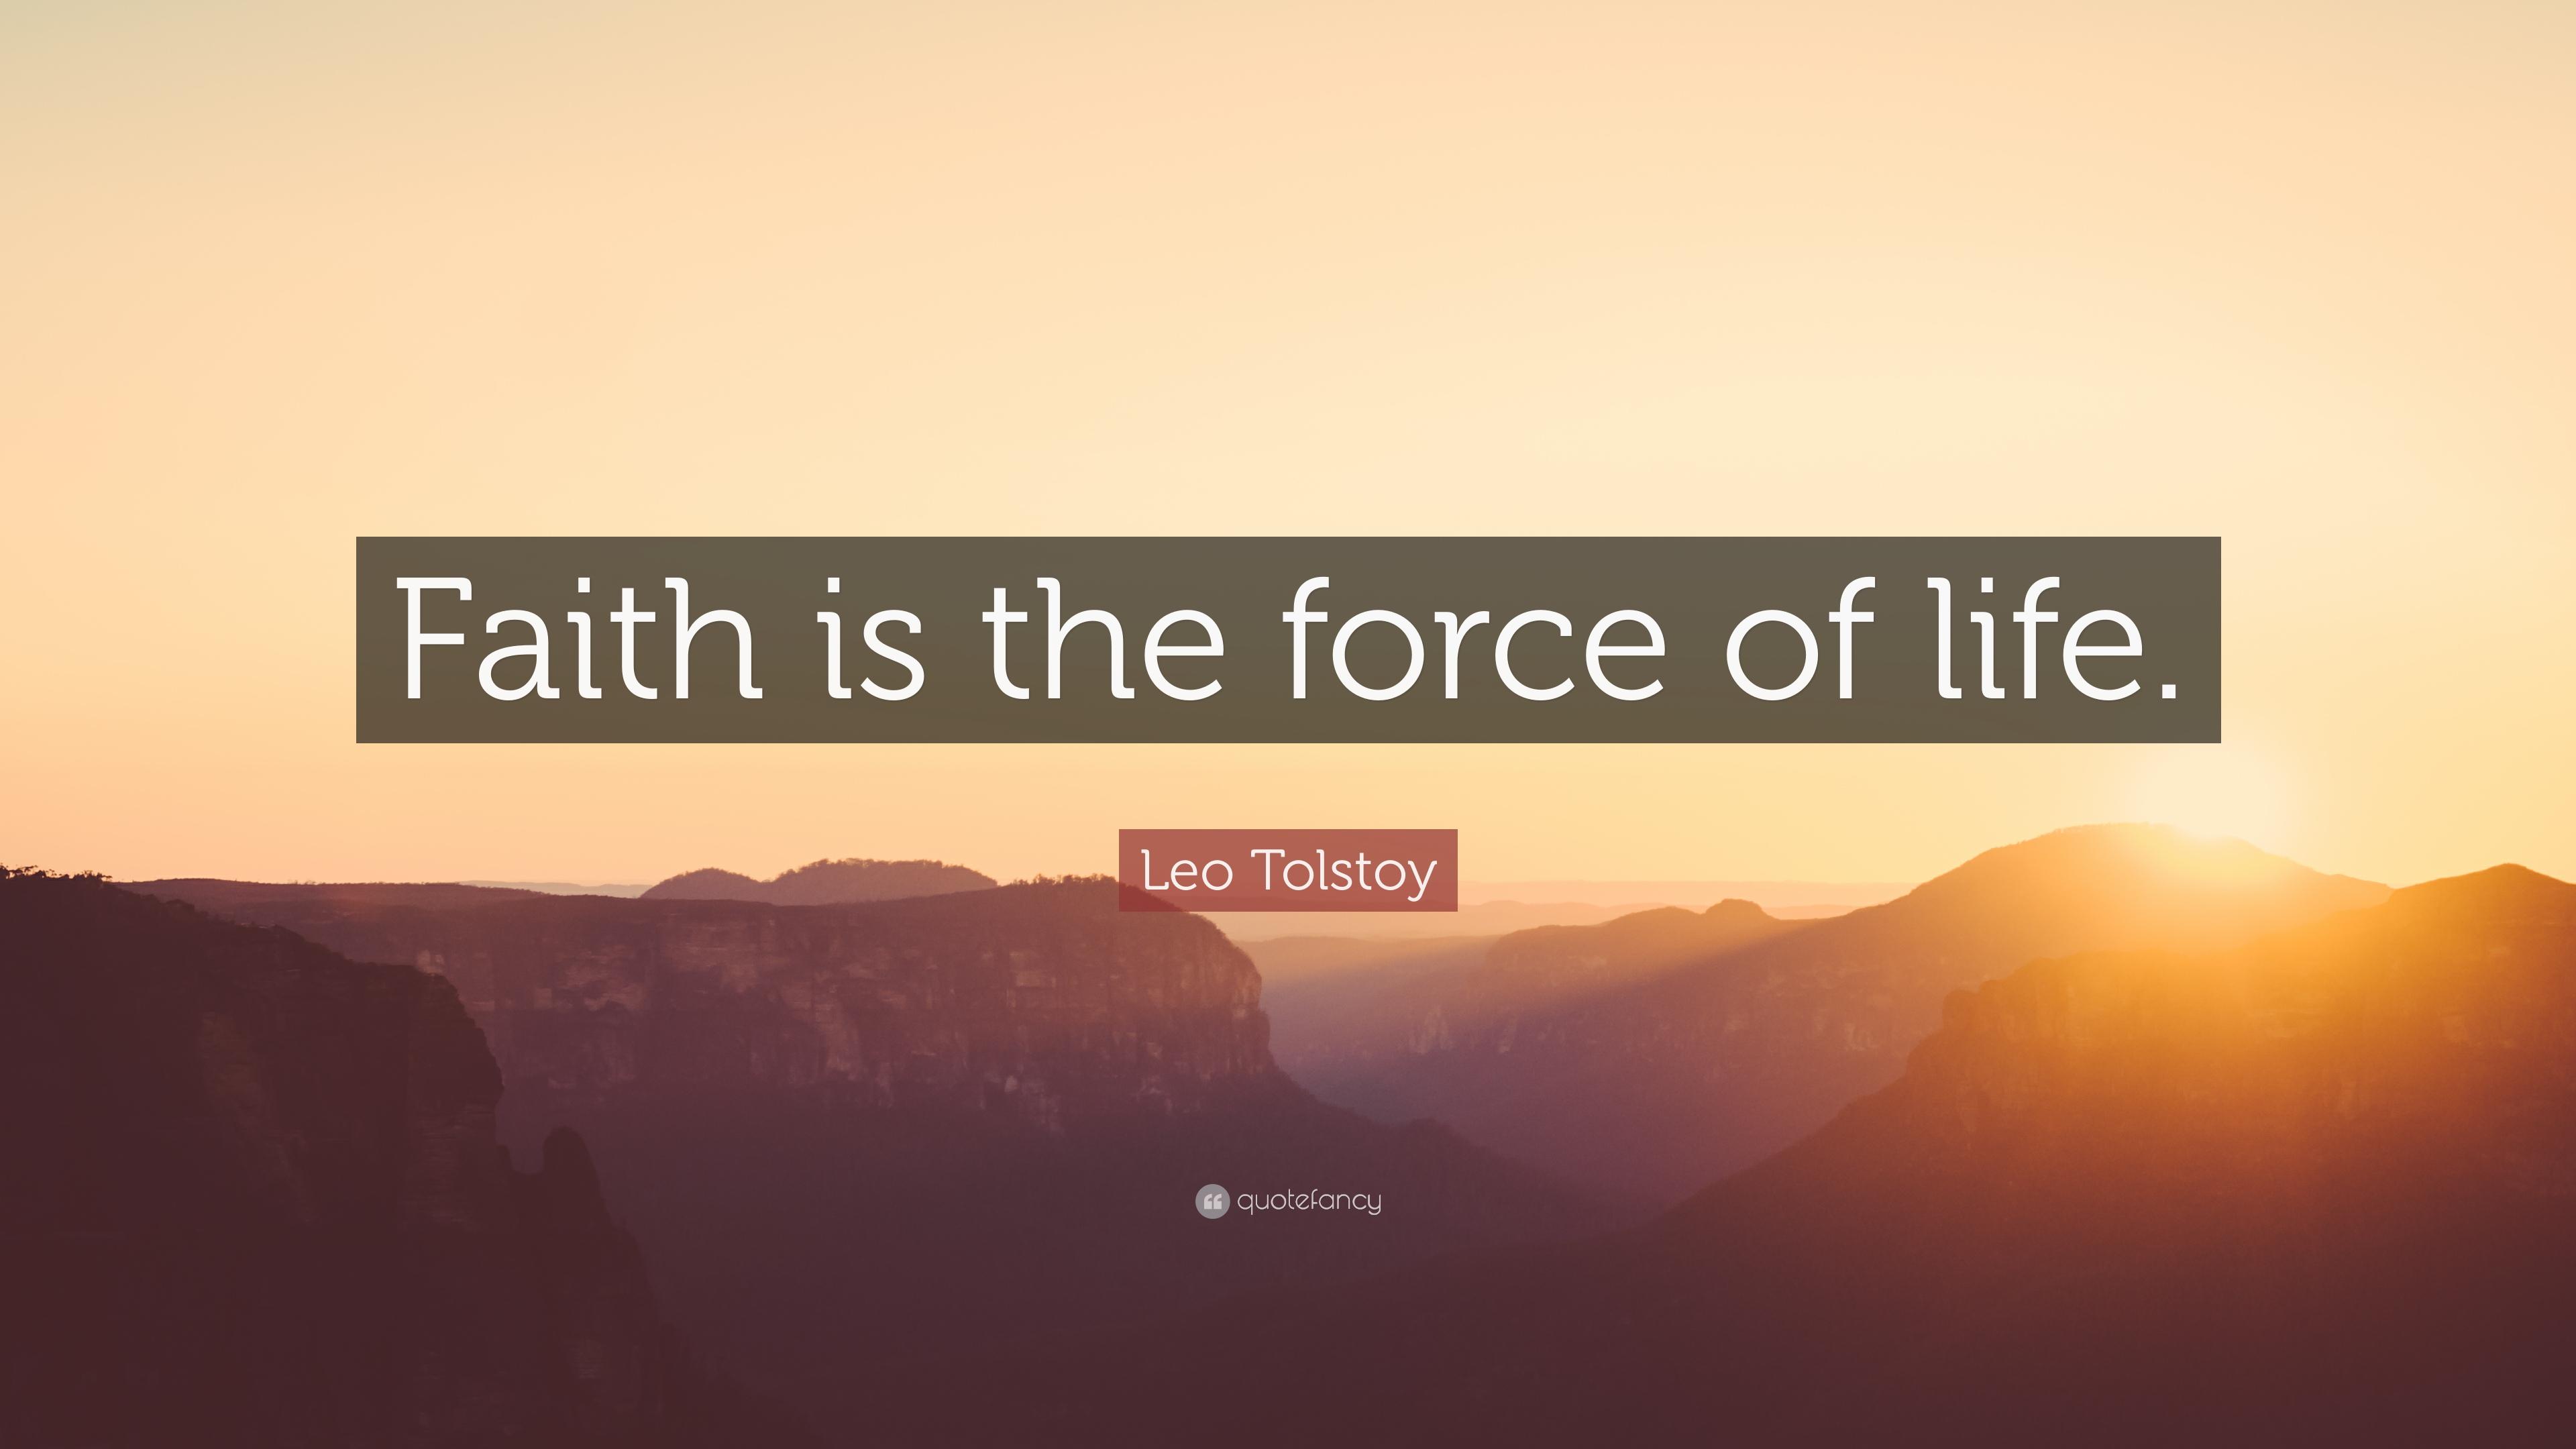 Leo Tolstoy Quote: “Faith is the force of life.” 12 wallpaper